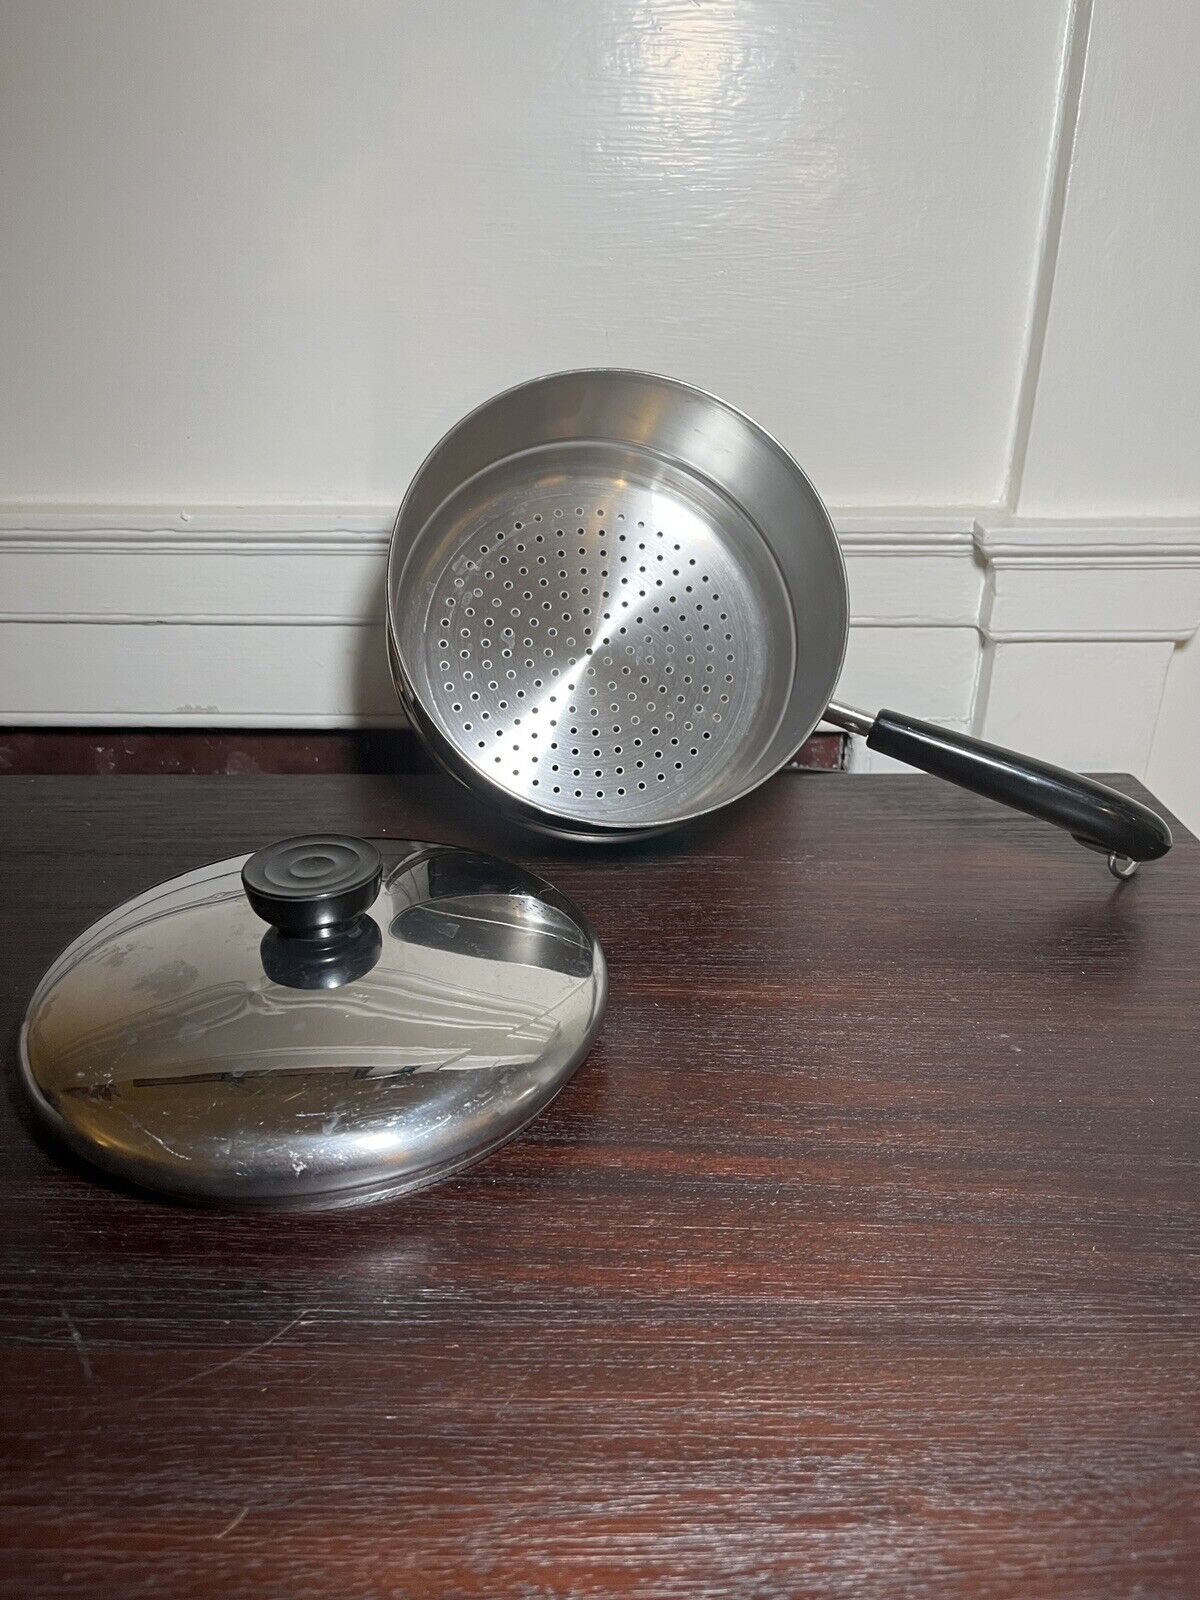 Vintage Revere Ware Steamer Strainer Insert for Pot With Lid Stainless Steel